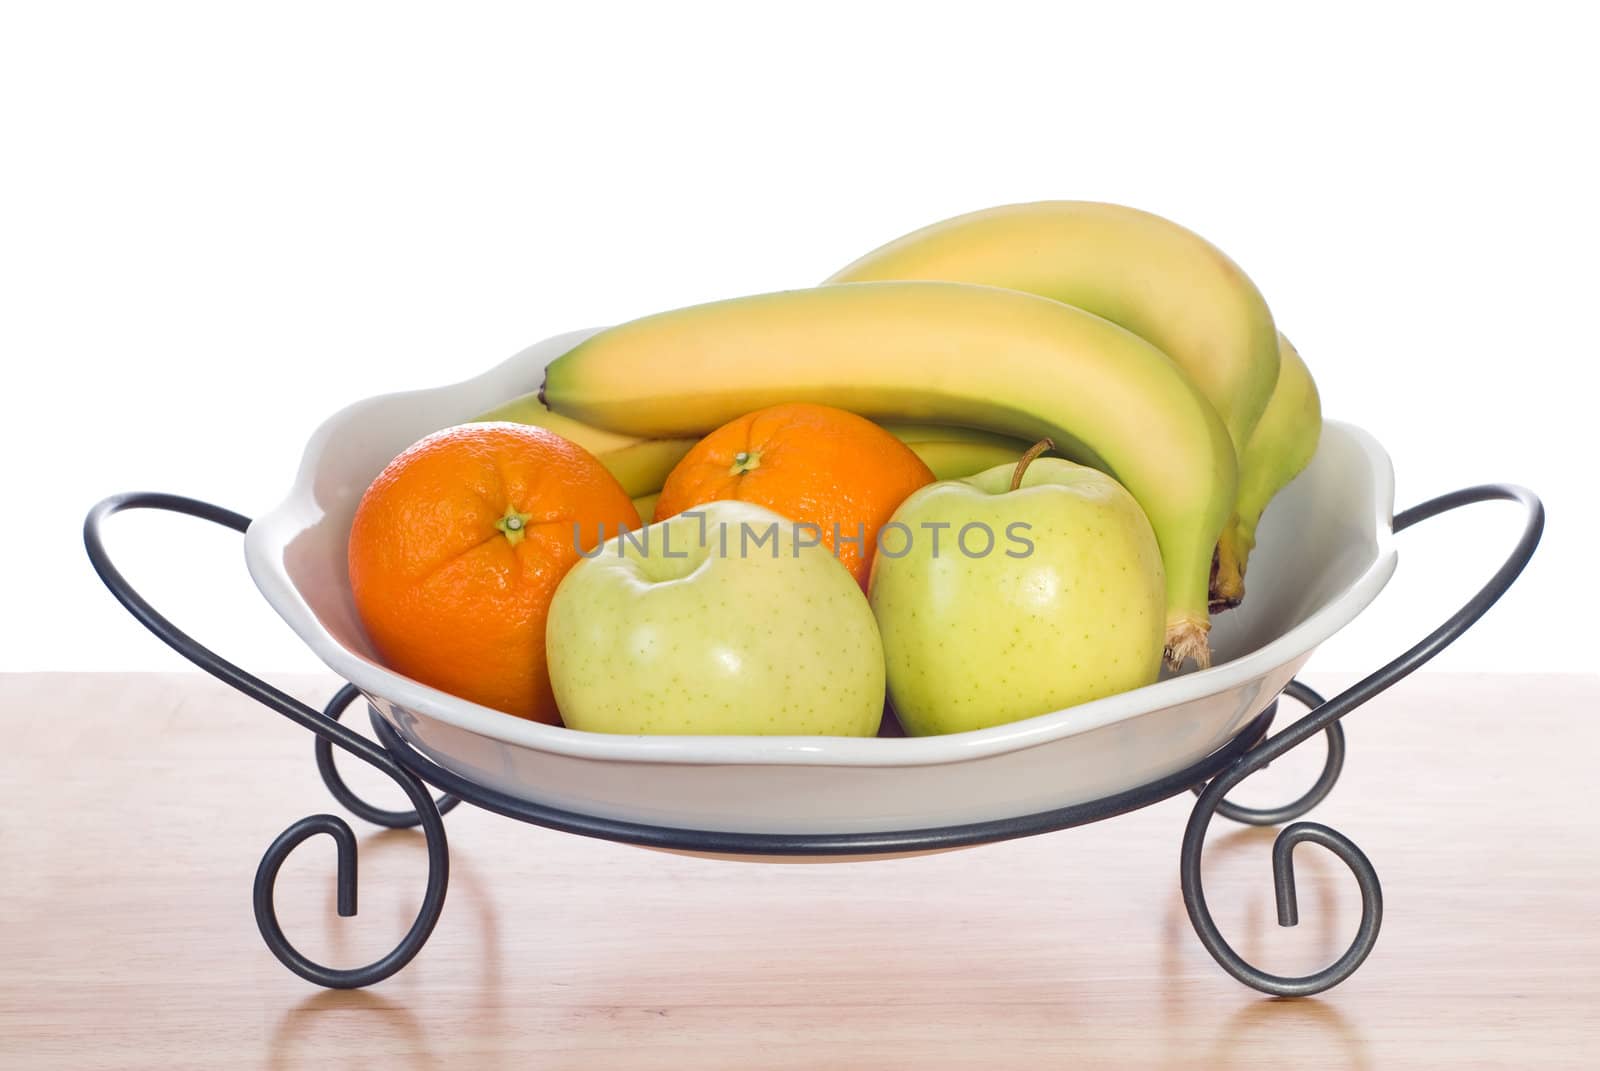 Assorted fresh fruit including bananas, oranges and apples, sitting in a bowl and shot on a wooden table